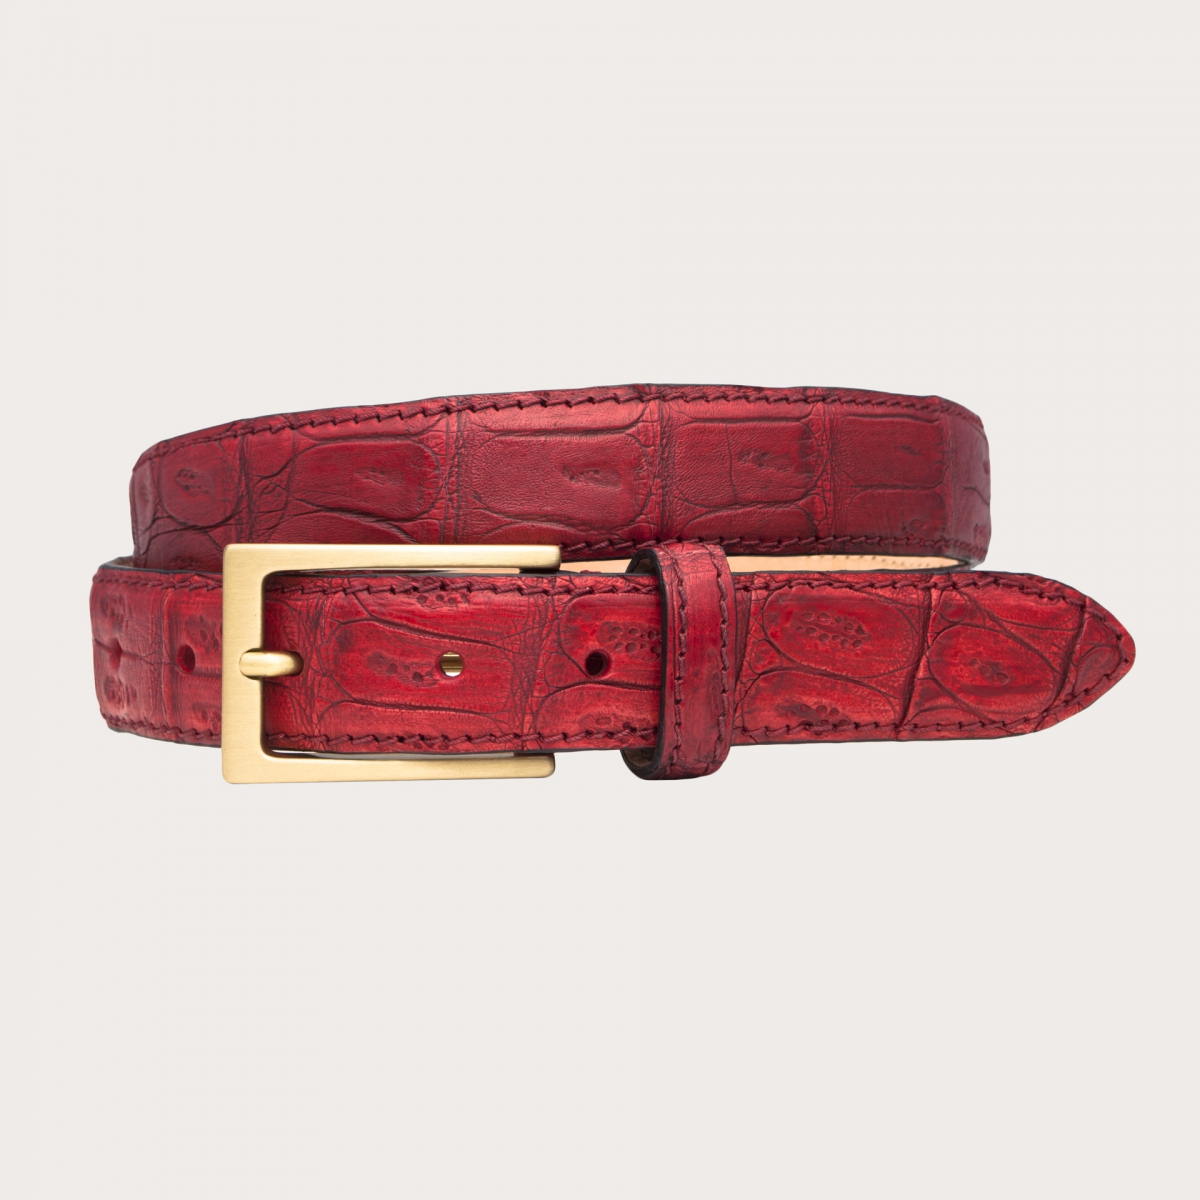 BRUCLE Elegant belt in hand-colored red crocodile tail